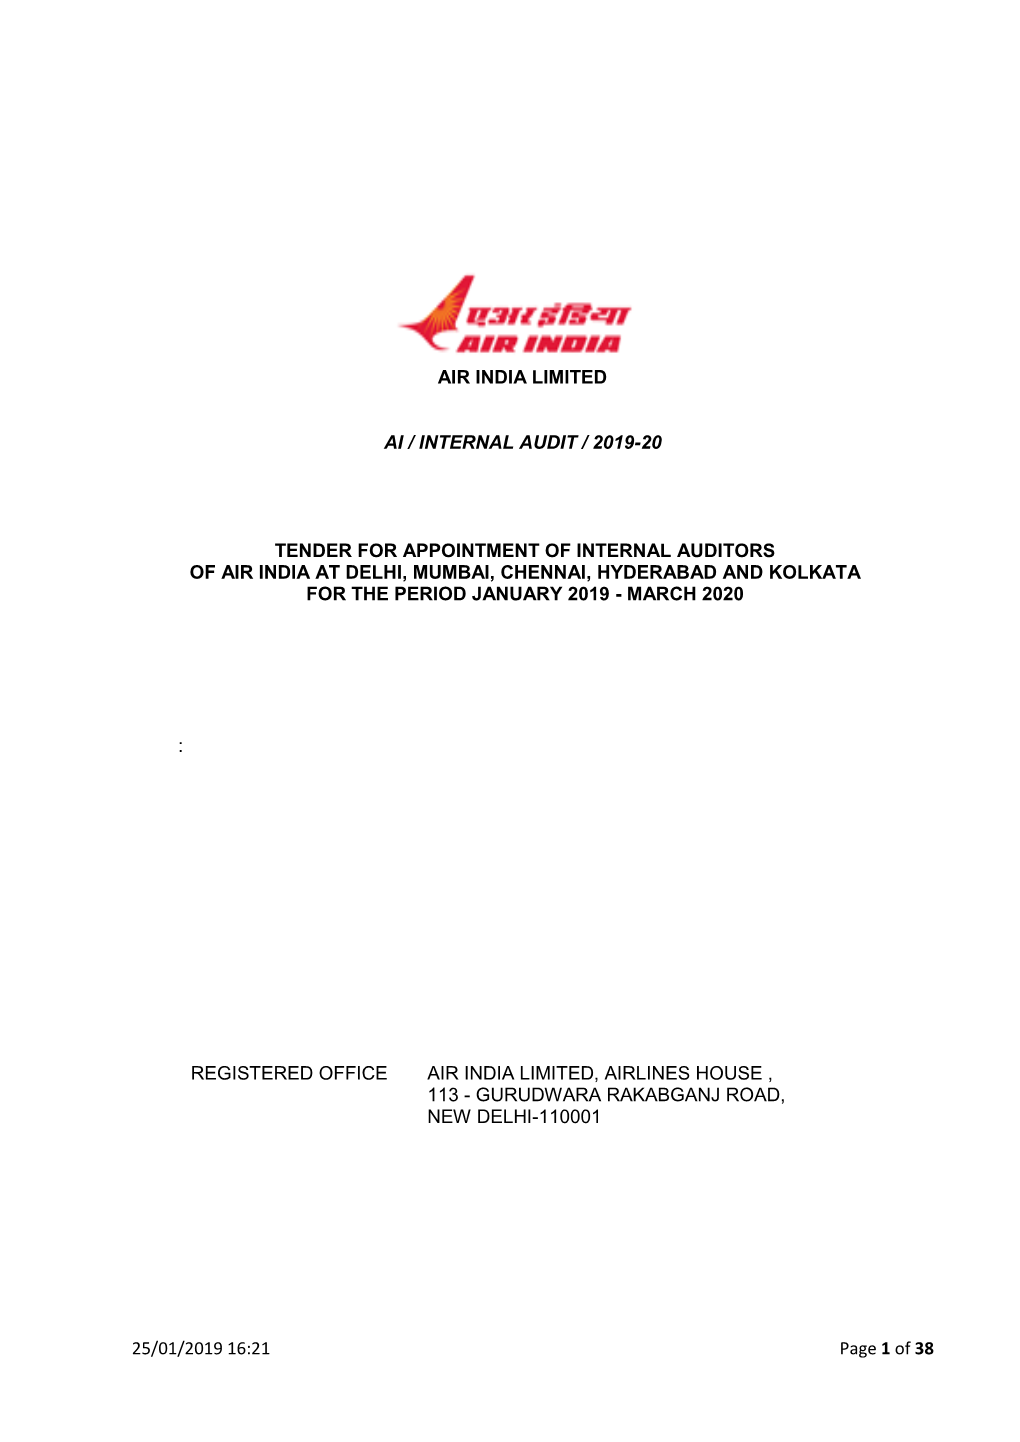 25/01/2019 16:21 Page 1 of 38 AIR INDIA LIMITED AI / INTERNAL AUDIT / 2019-20 TENDER for APPOINTMENT of INTERNAL AUDITORS of AI